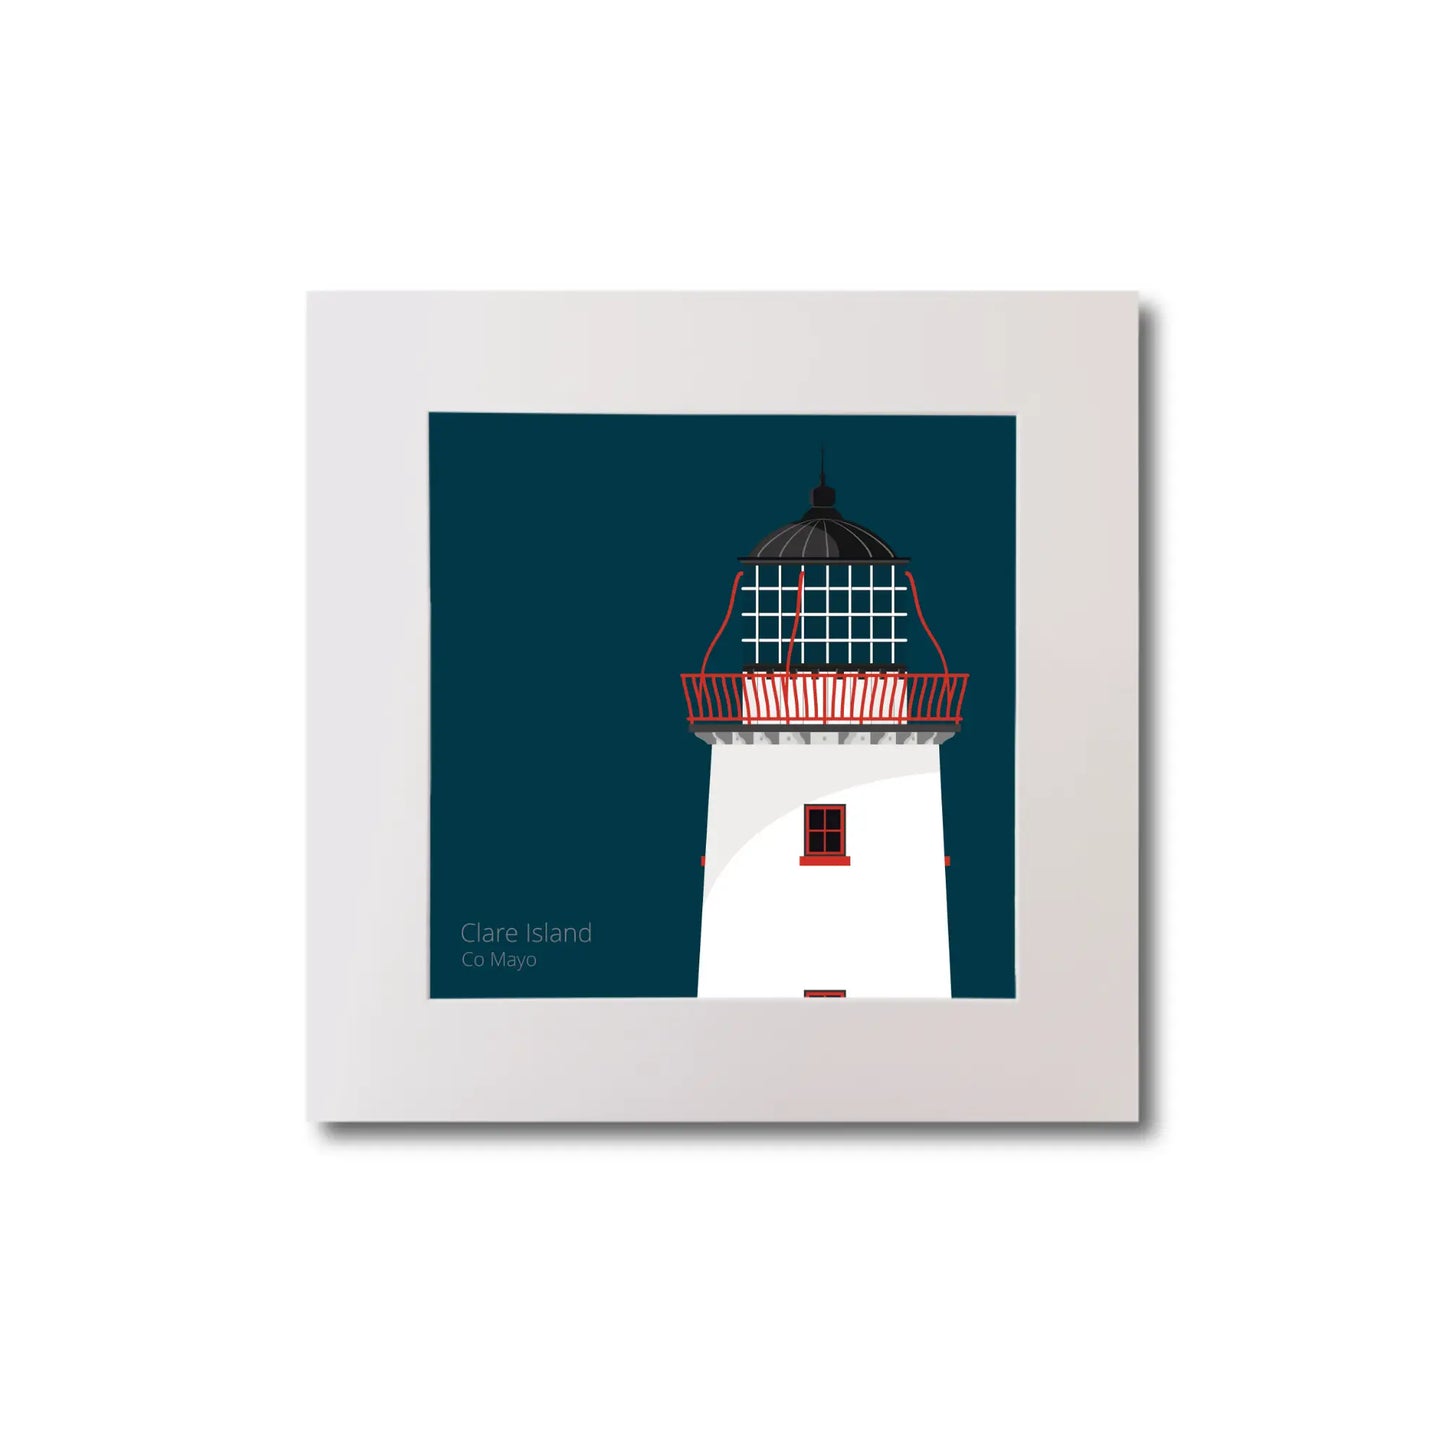 Illustration of Clare Island lighthouse on a midnight blue background, mounted and measuring 20x20cm.